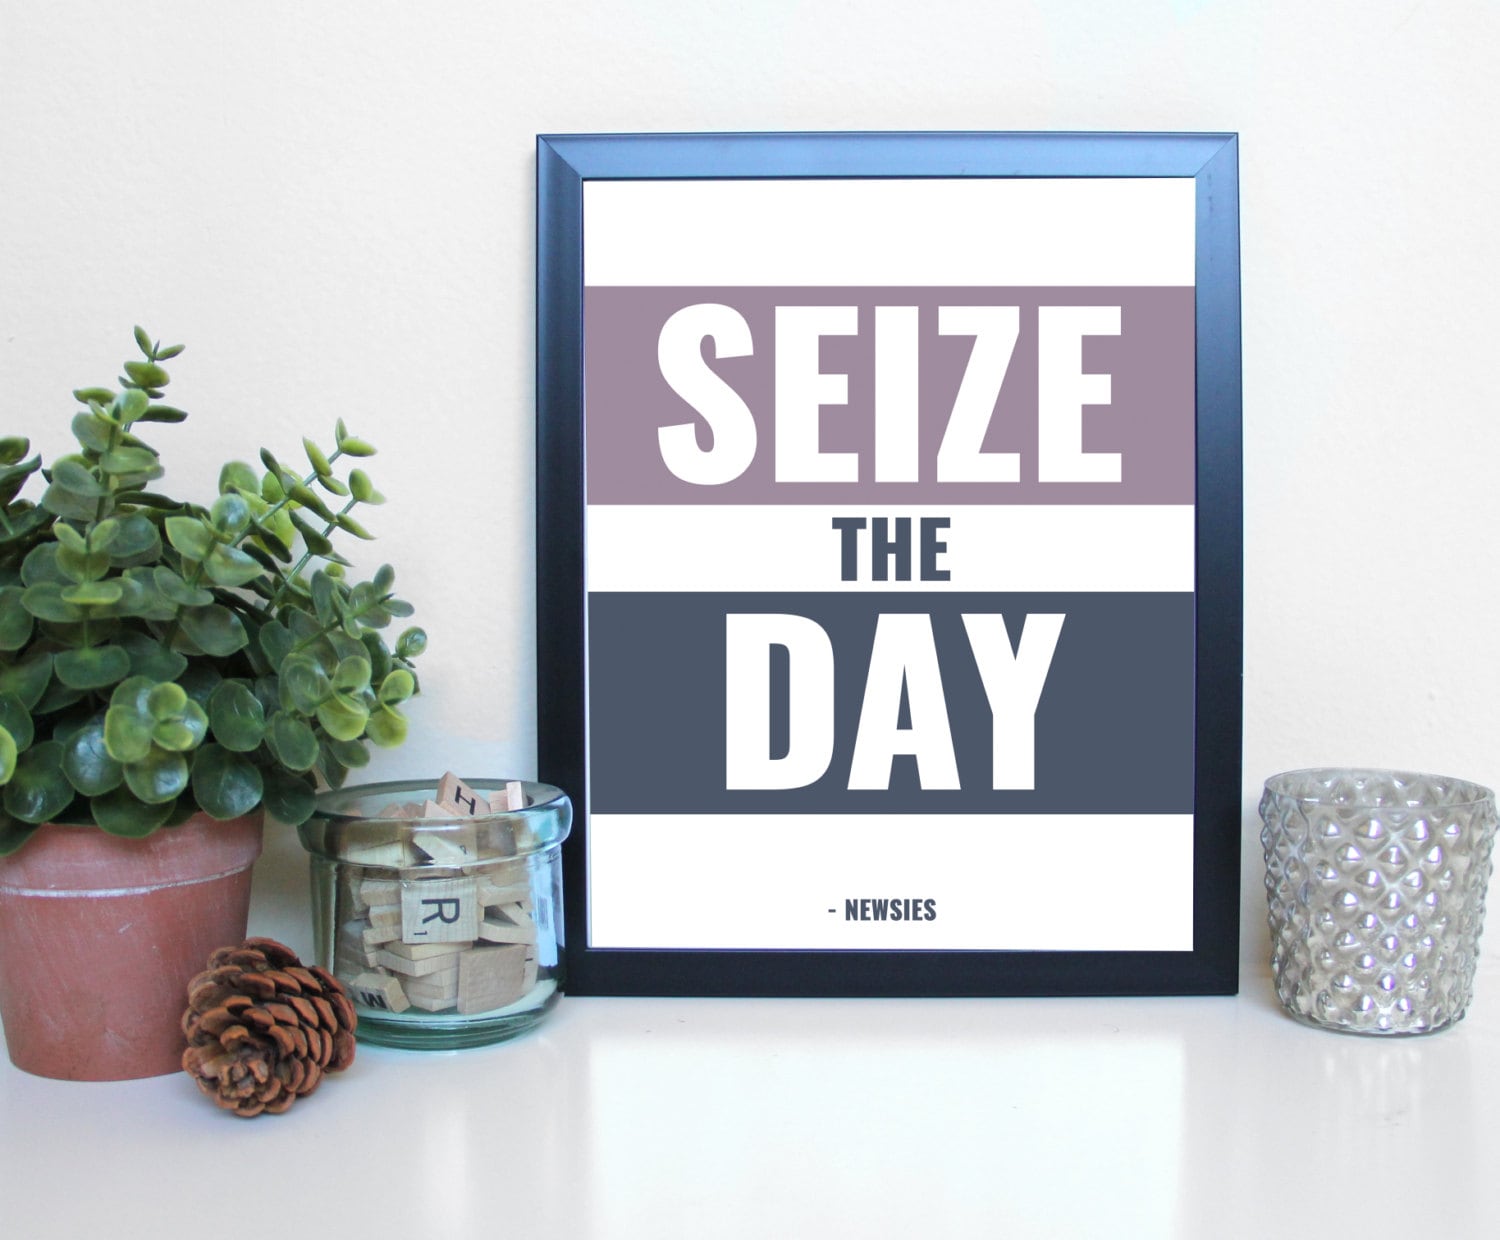 Newsies Seize The Day Broadway Musical Theatre Typography Etsy